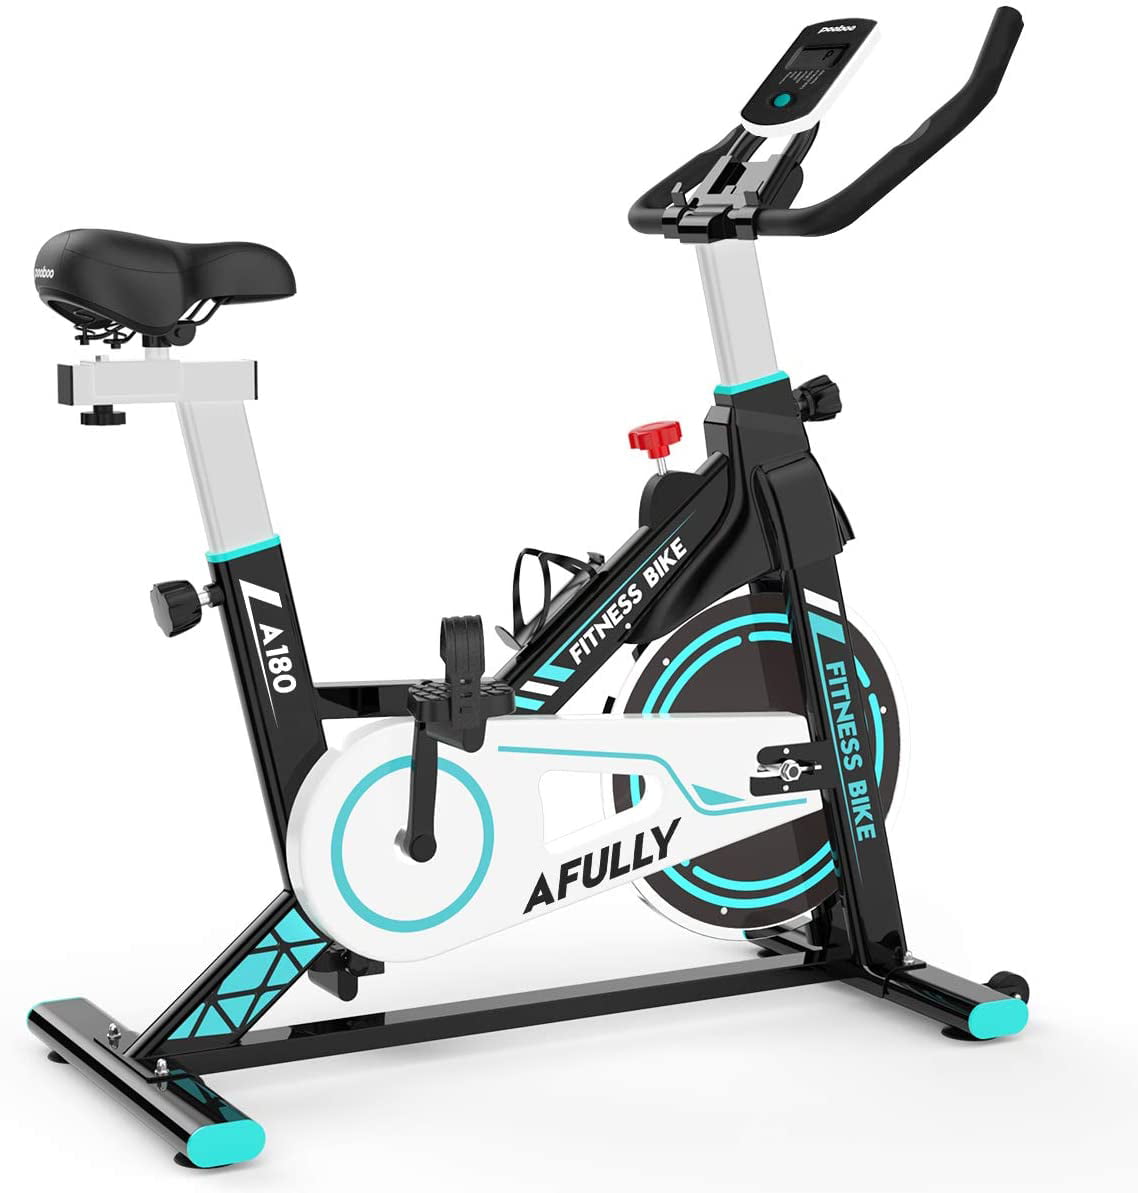 Afully Indoor Exercise Bike, Indoor Cycling Stationary Bike Belt Drive